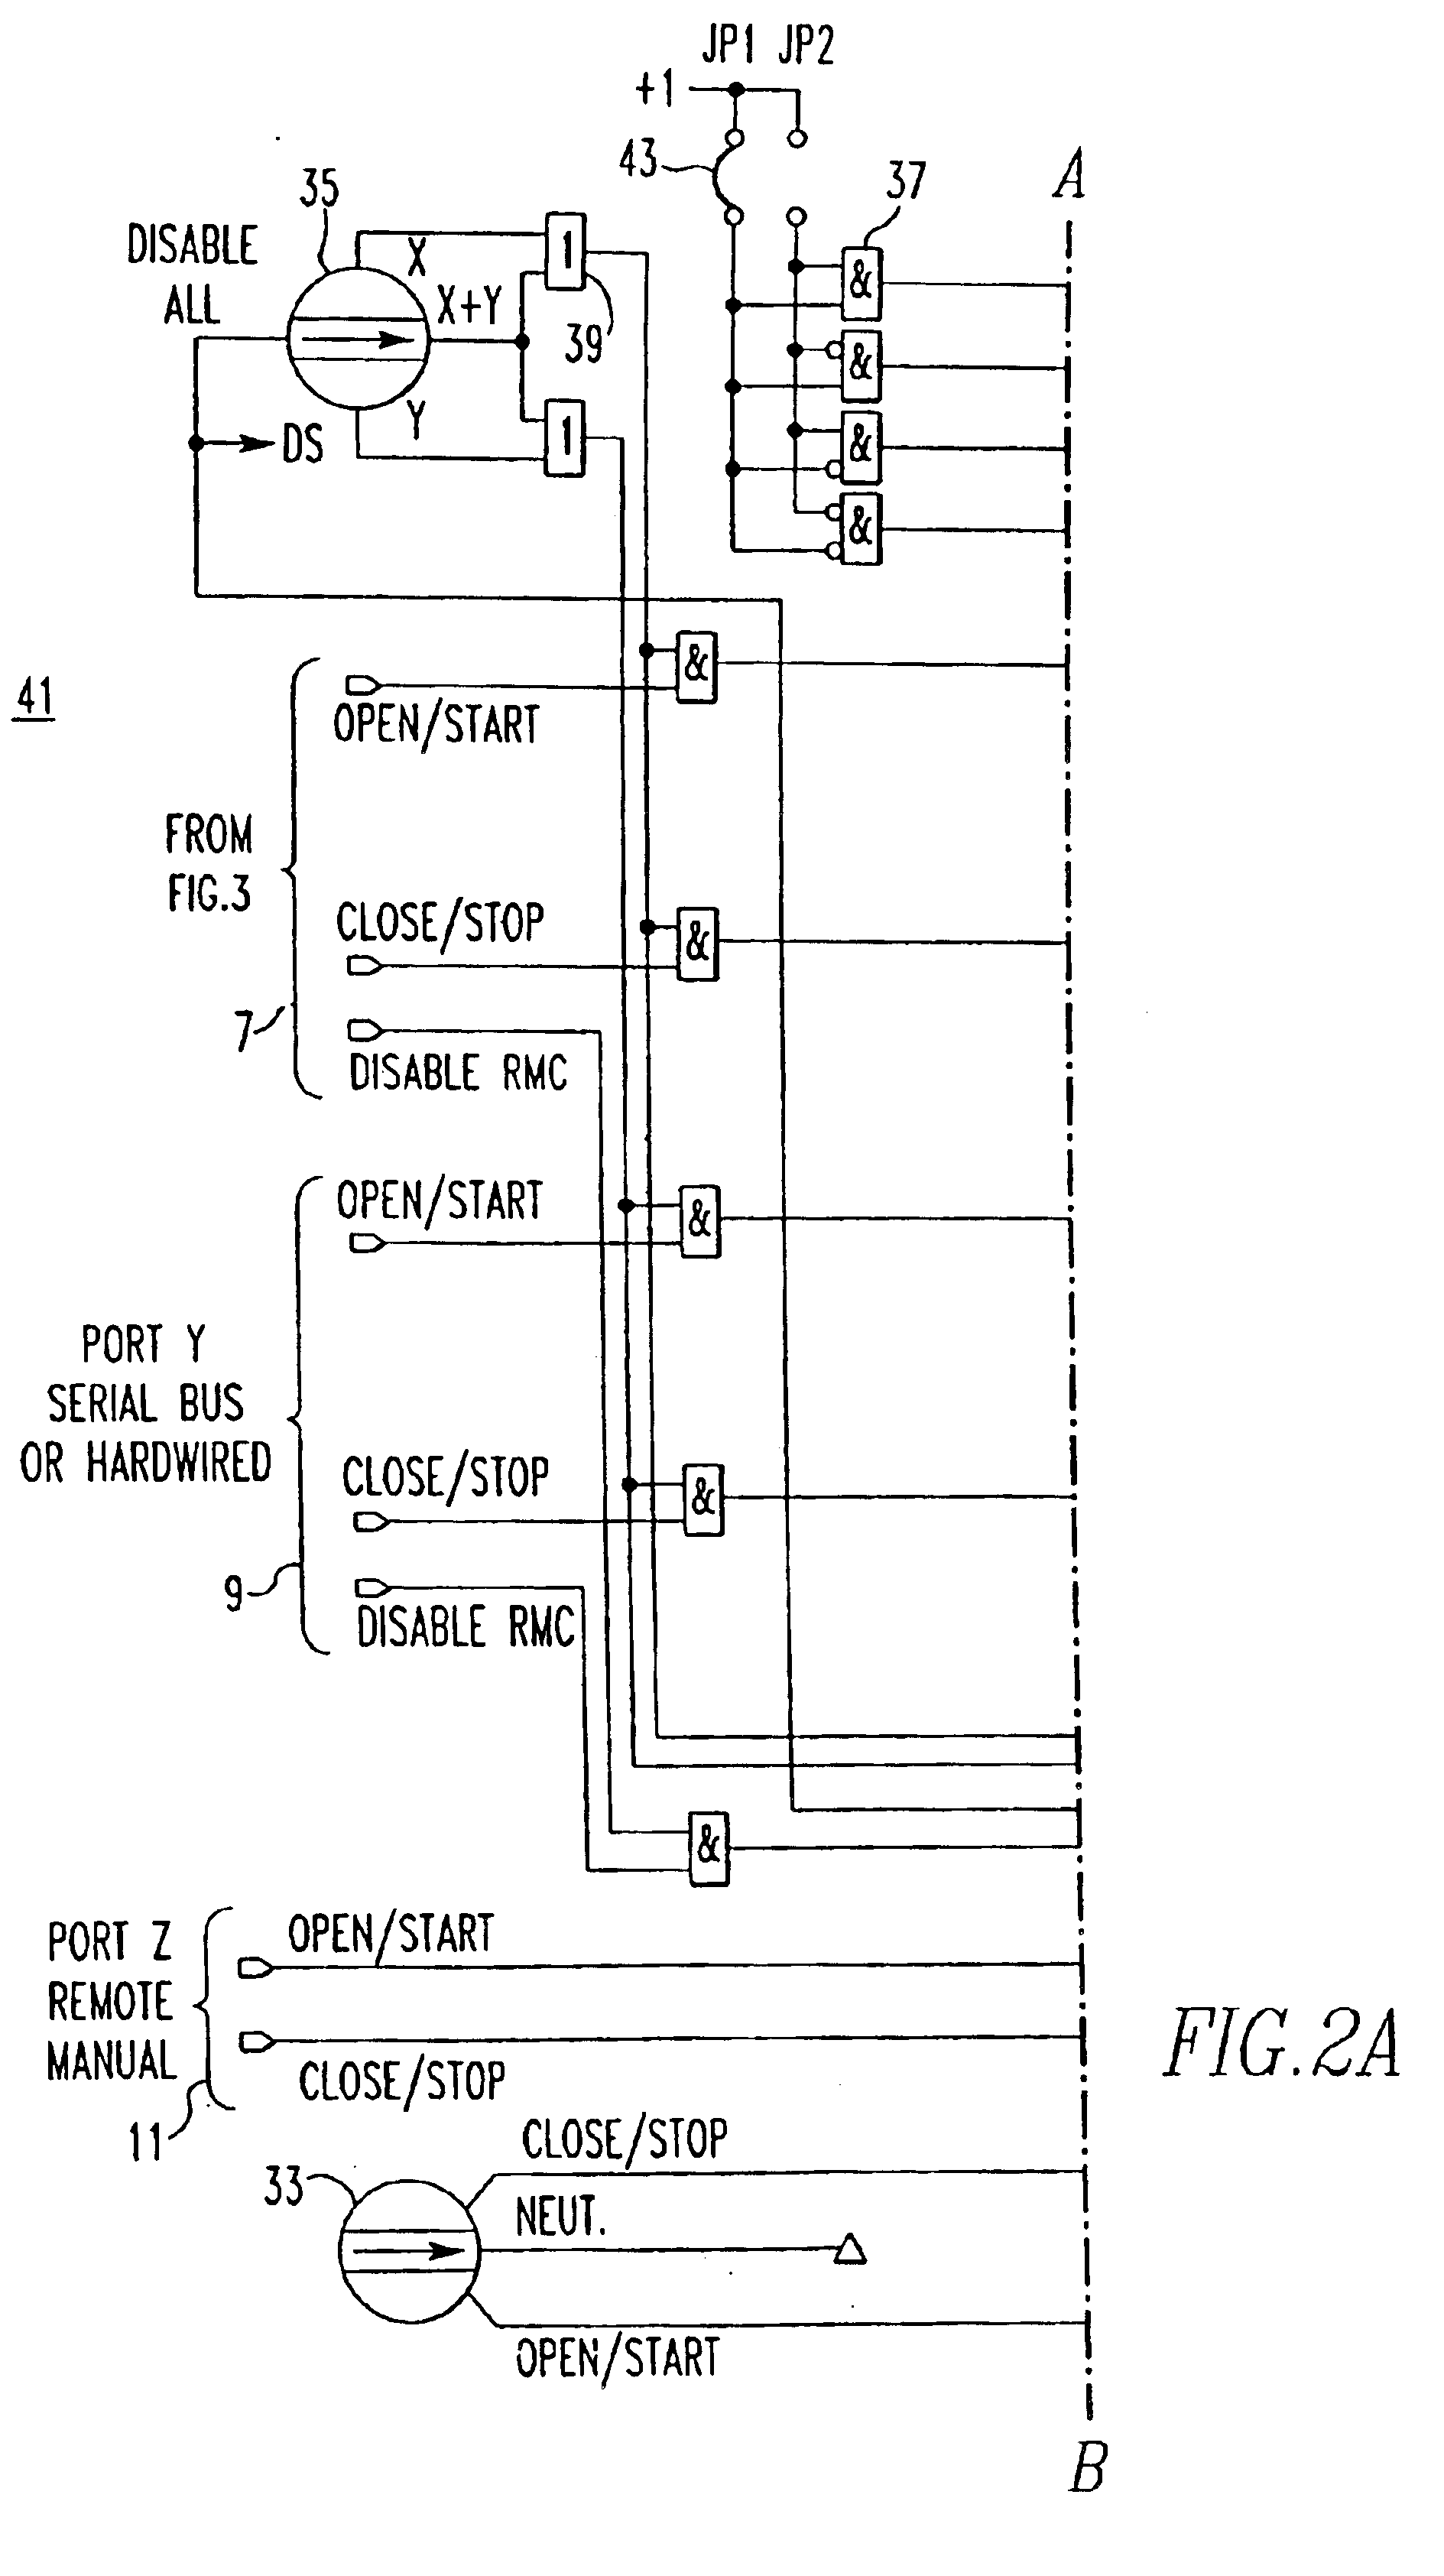 Component interface module